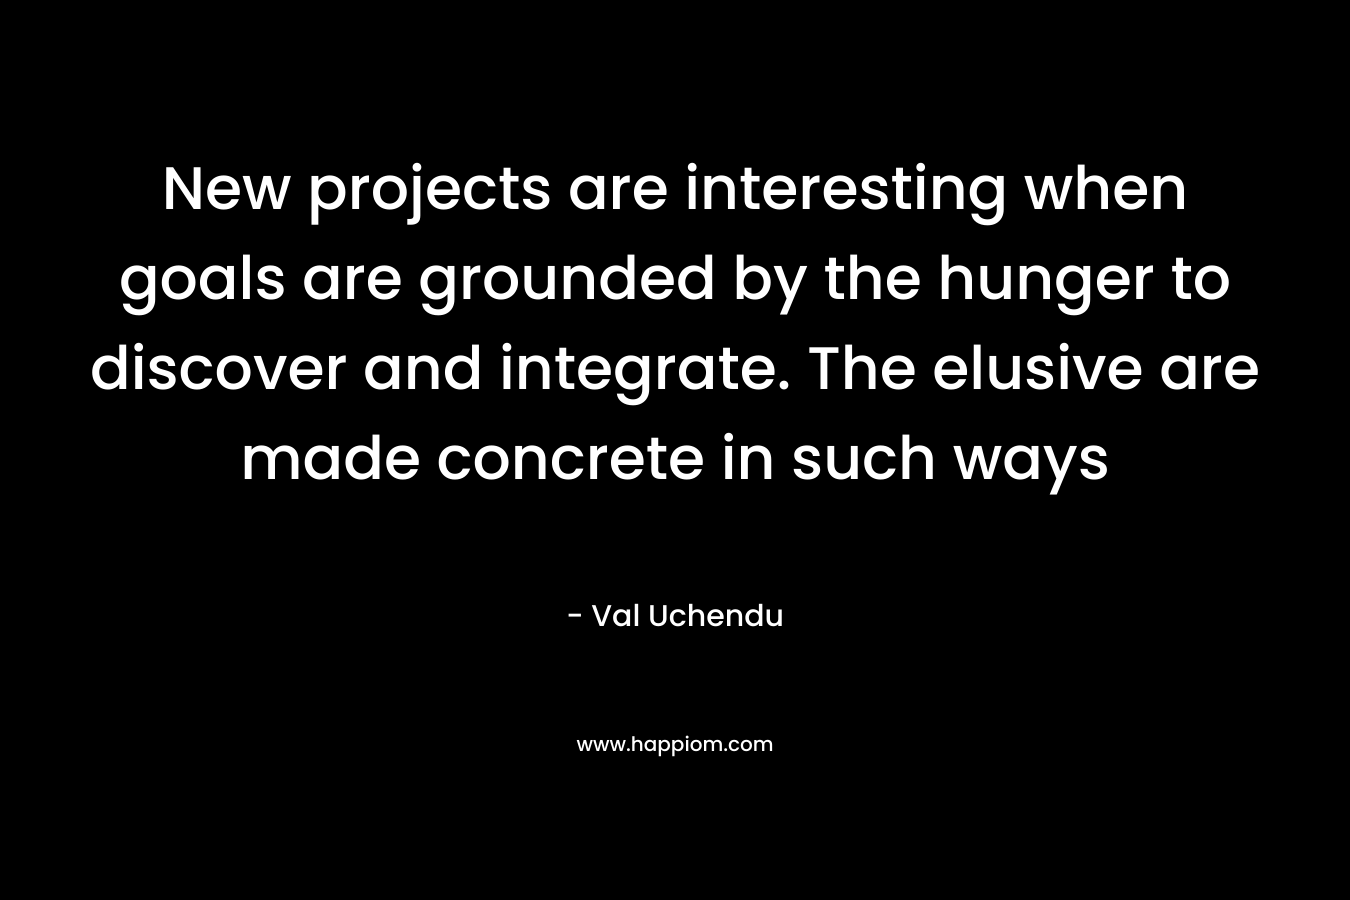 New projects are interesting when goals are grounded by the hunger to discover and integrate. The elusive are made concrete in such ways